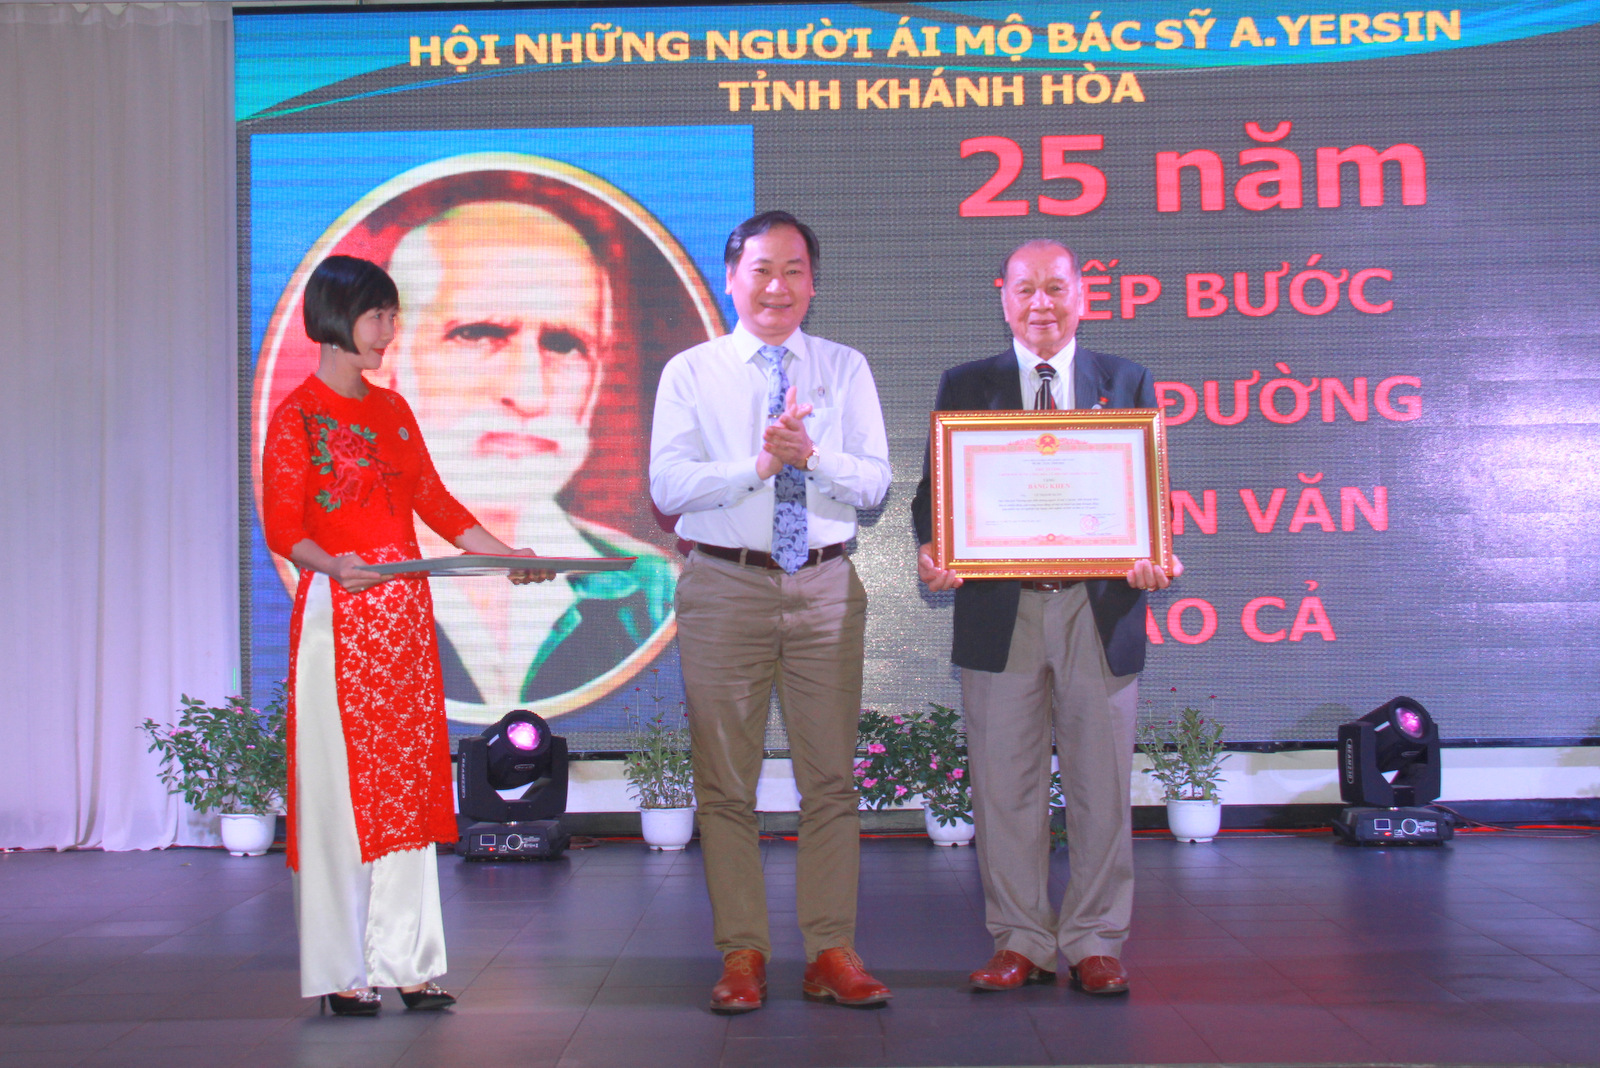 Nguyen Dac Tai giving Prime Minister’s certificate of merit to Le Thanh Xuan.